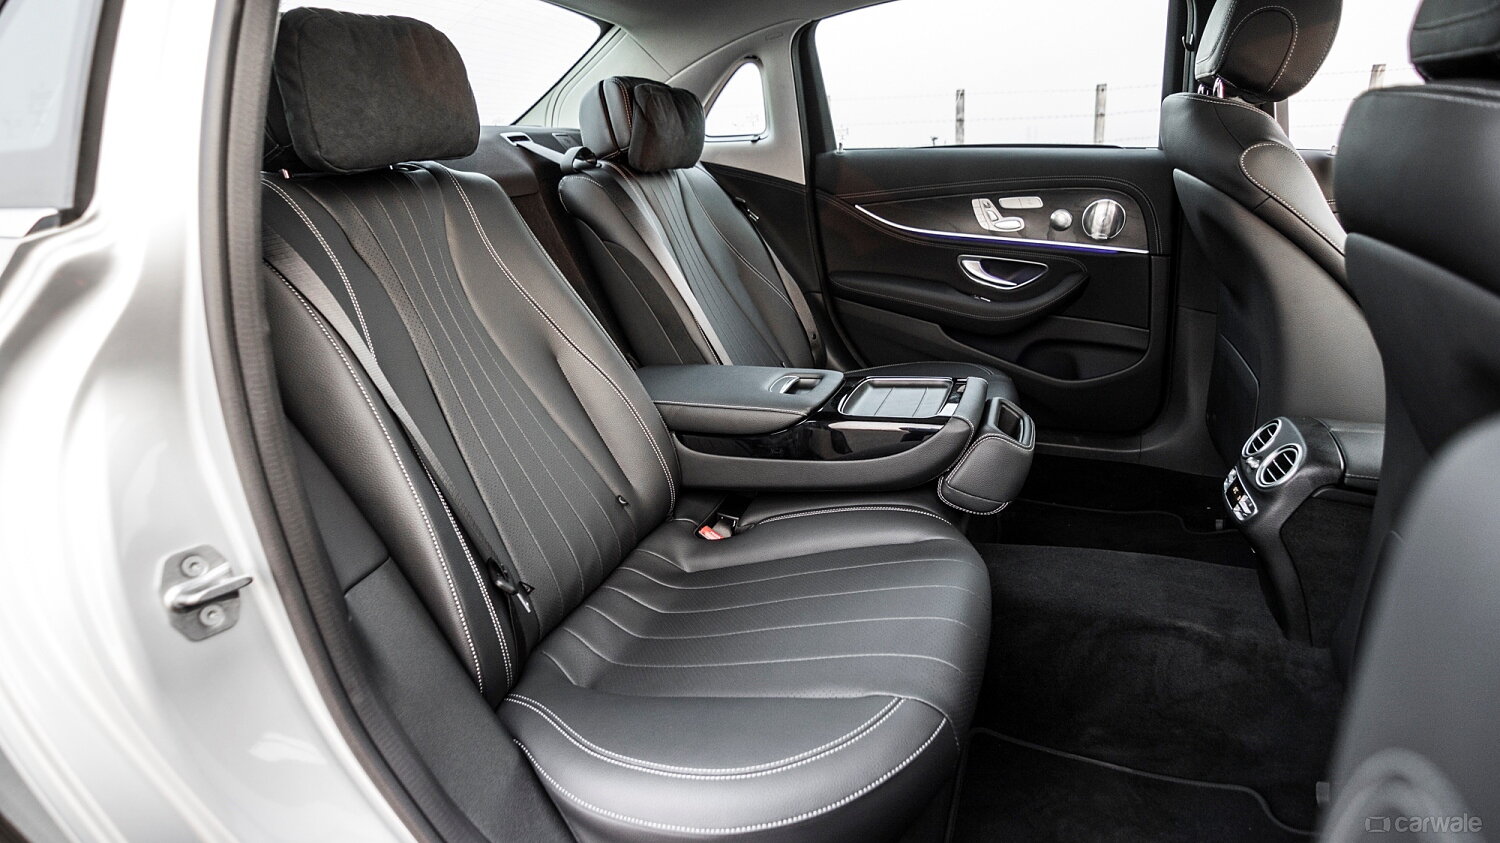 E-Class Rear Seat Space Image, E-Class Photos in India - CarWale